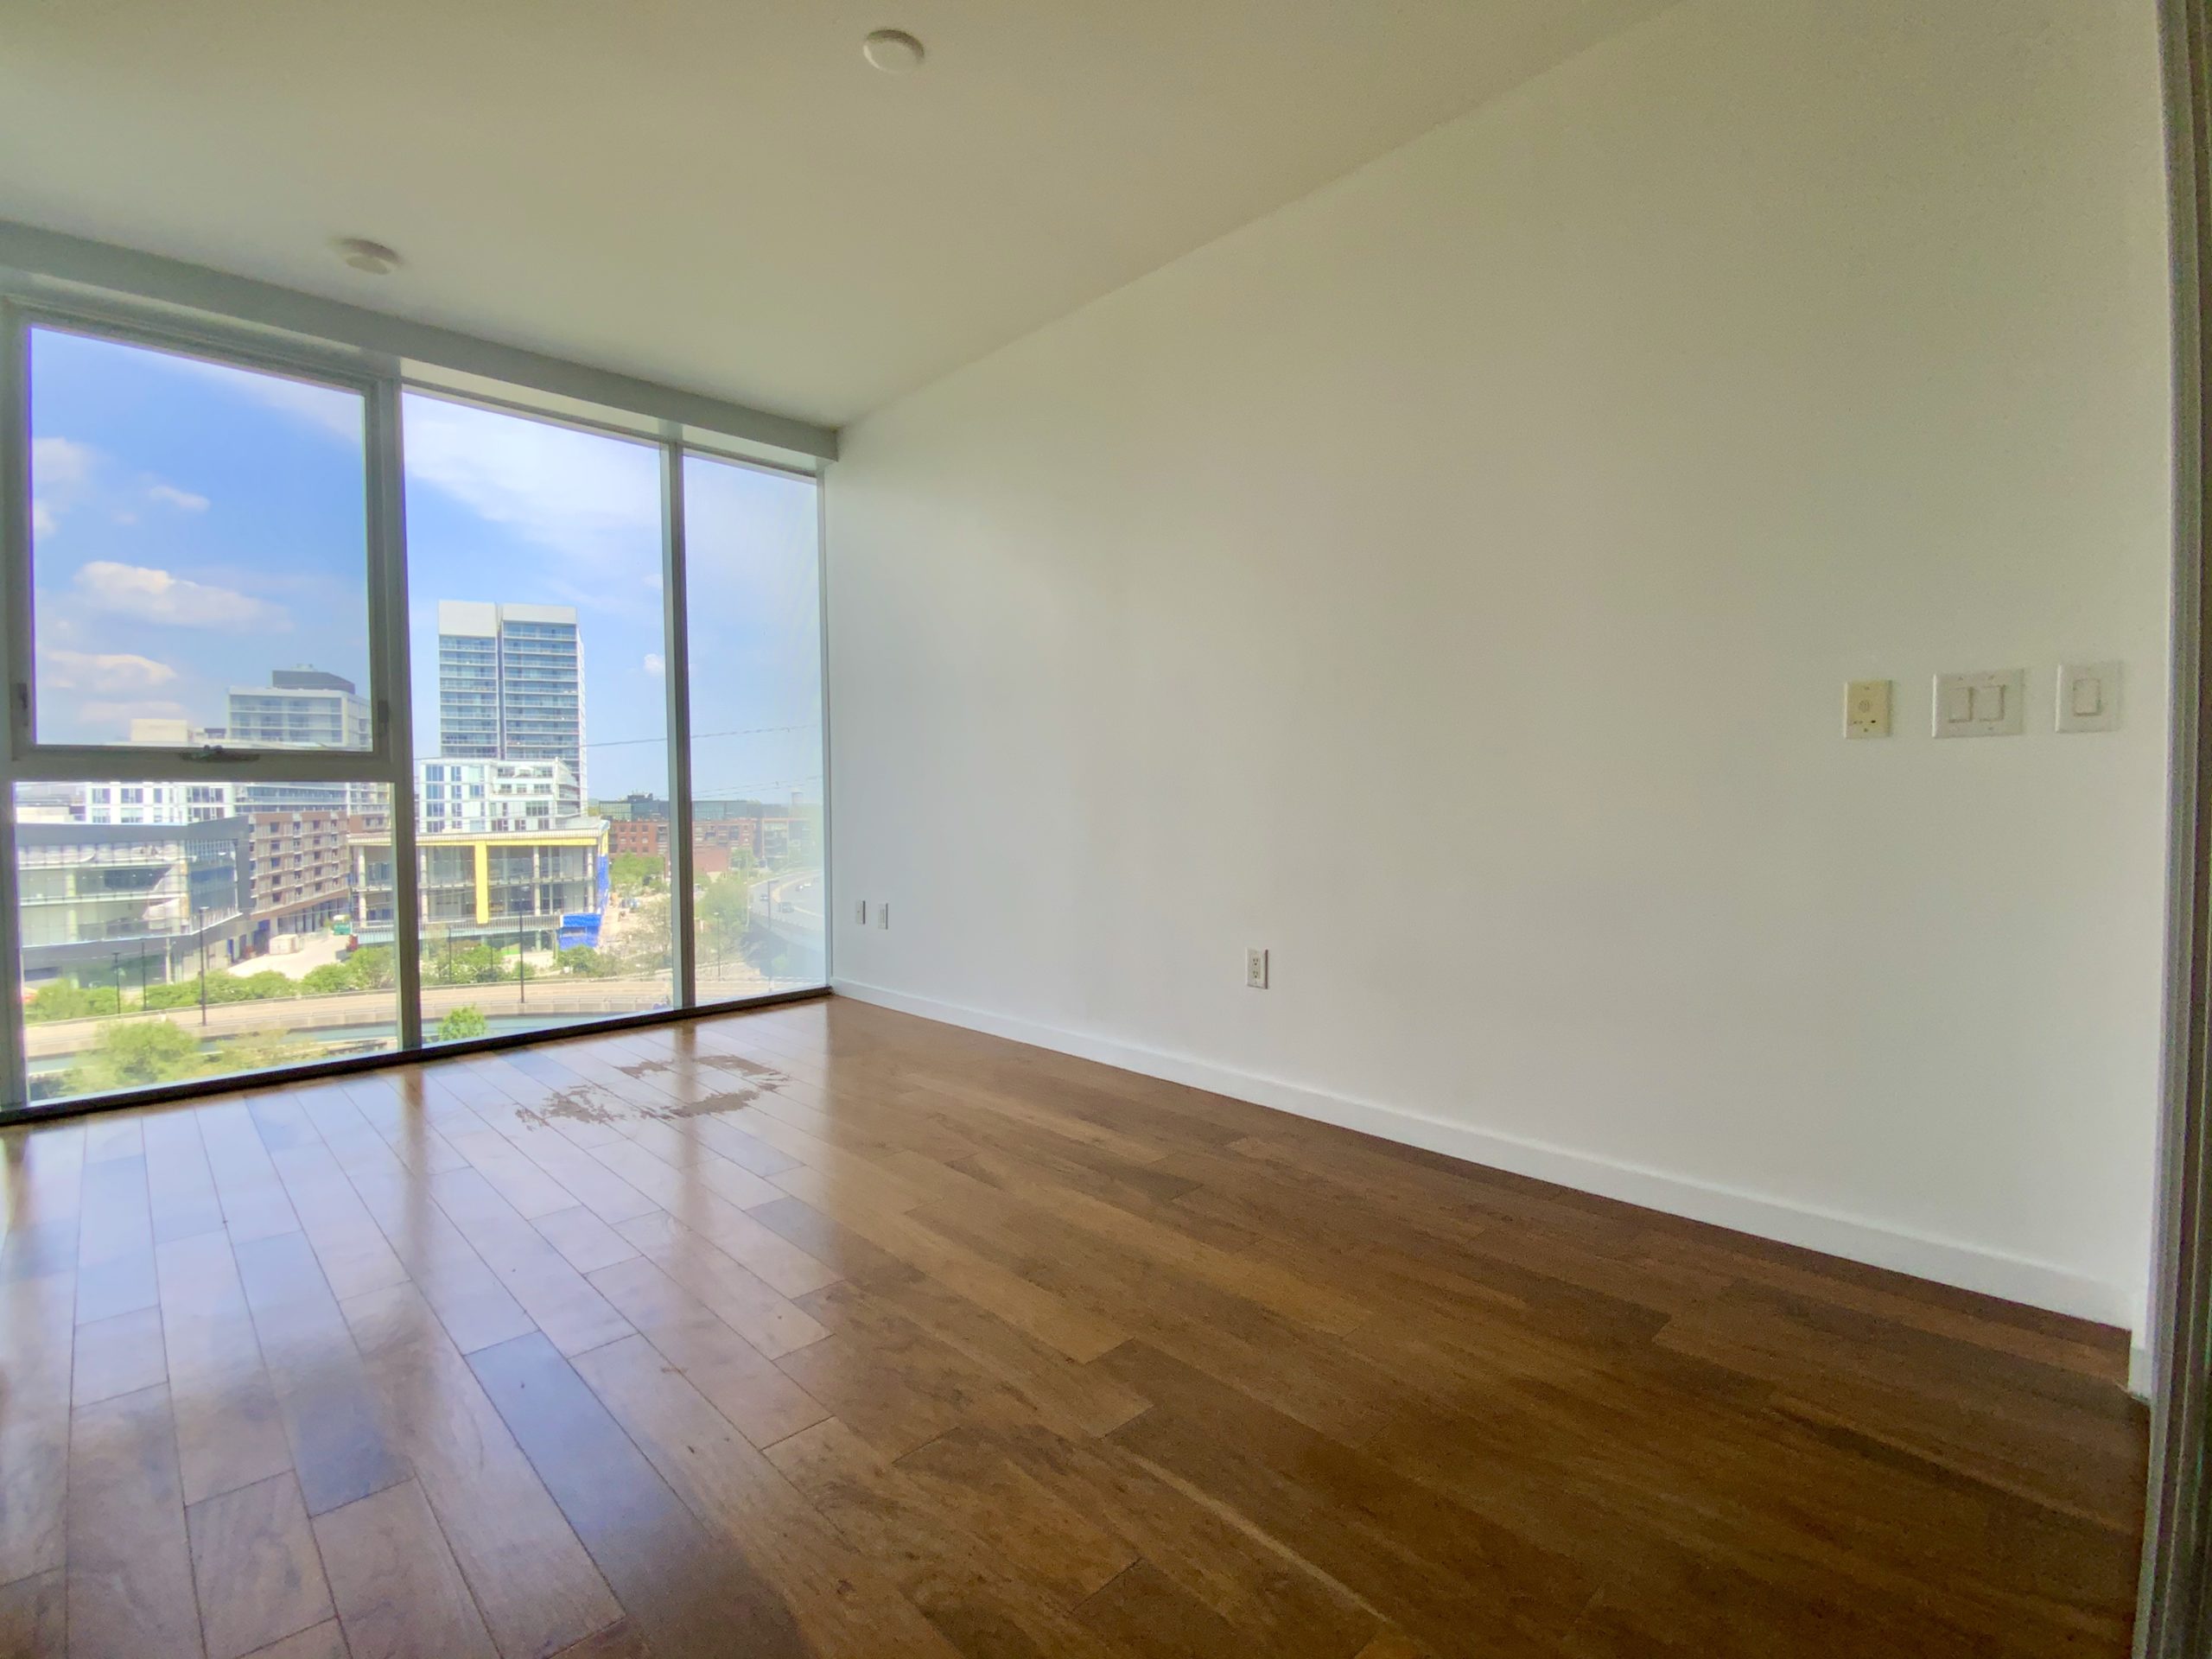 Shiny laminate floors in condo living room - 32 Trolley Crescent Suite 803.